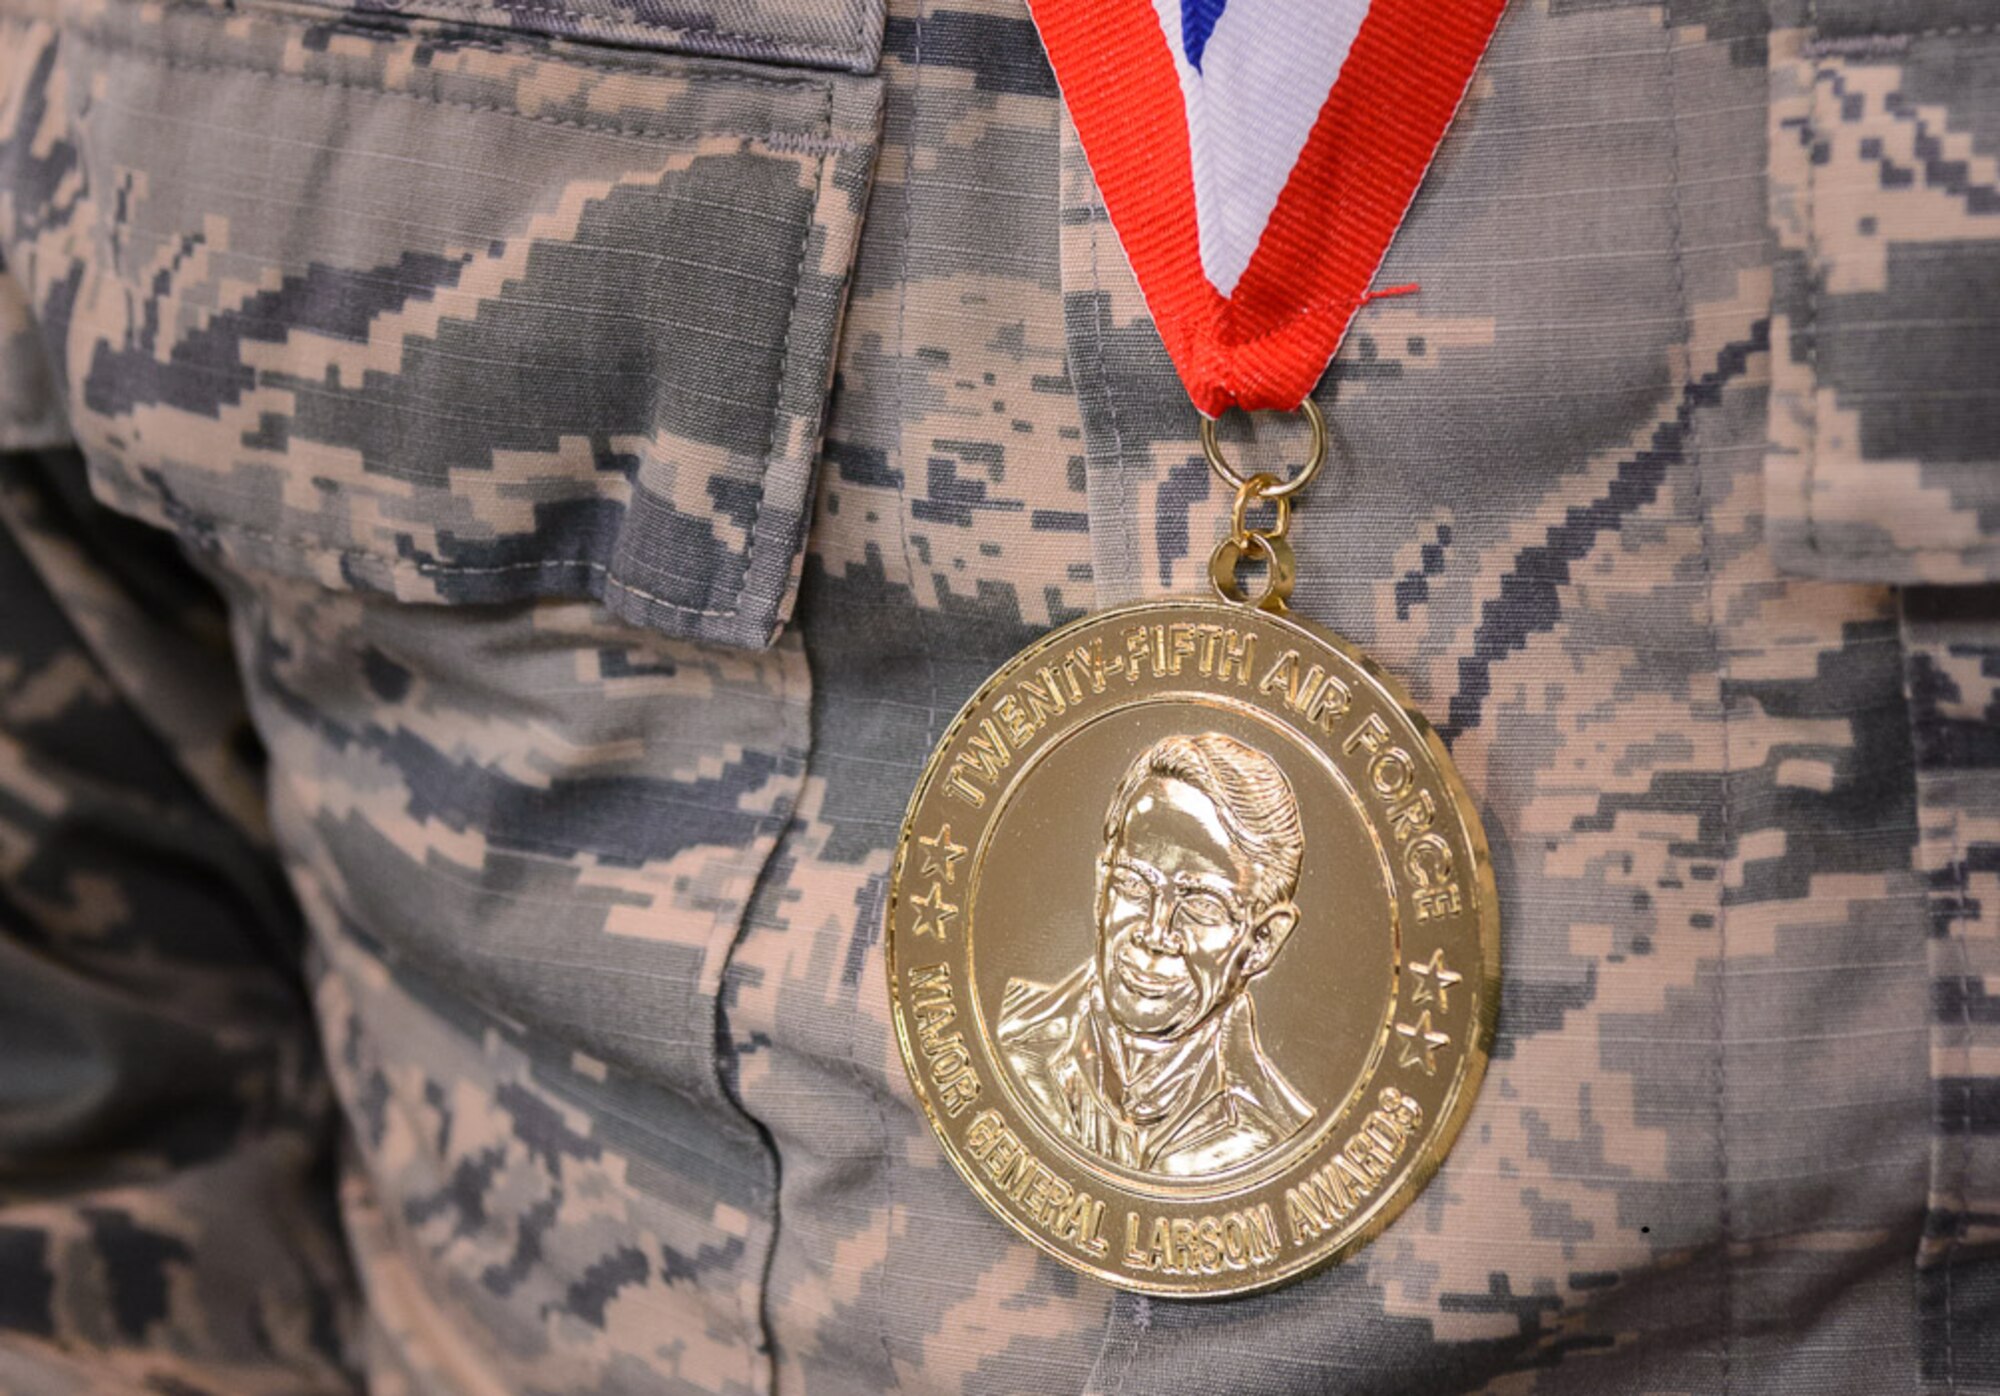 Every year, 25th Air Force recognizes the best Airmen in a variety of intelligence, surveillance and reconnaissance career fields through the Larson Awards program.